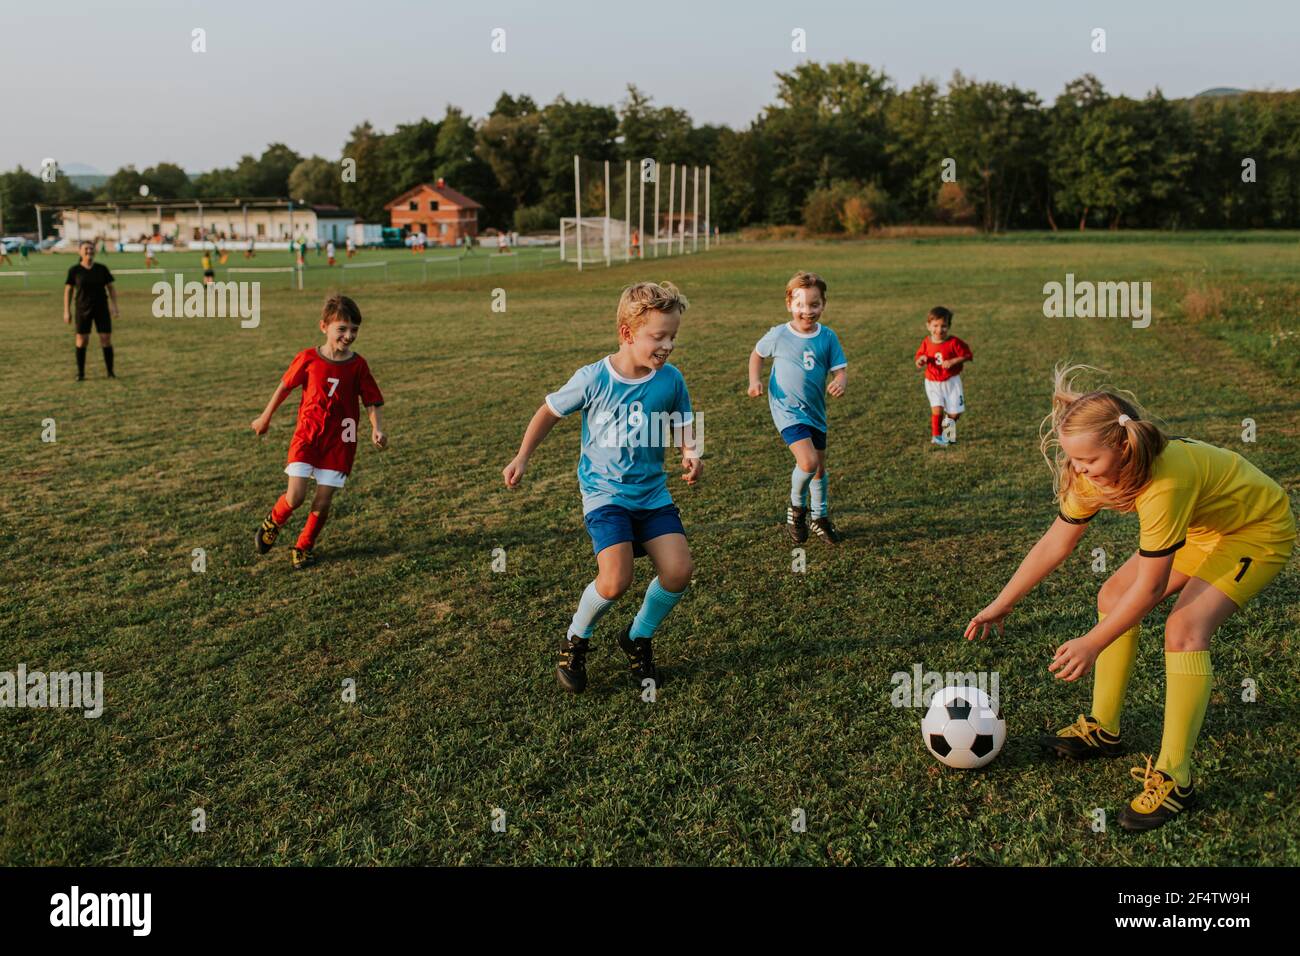 Children playing amateur soccer. Cheerful boys chasing football ball outside on pitch at sunset. Stock Photo